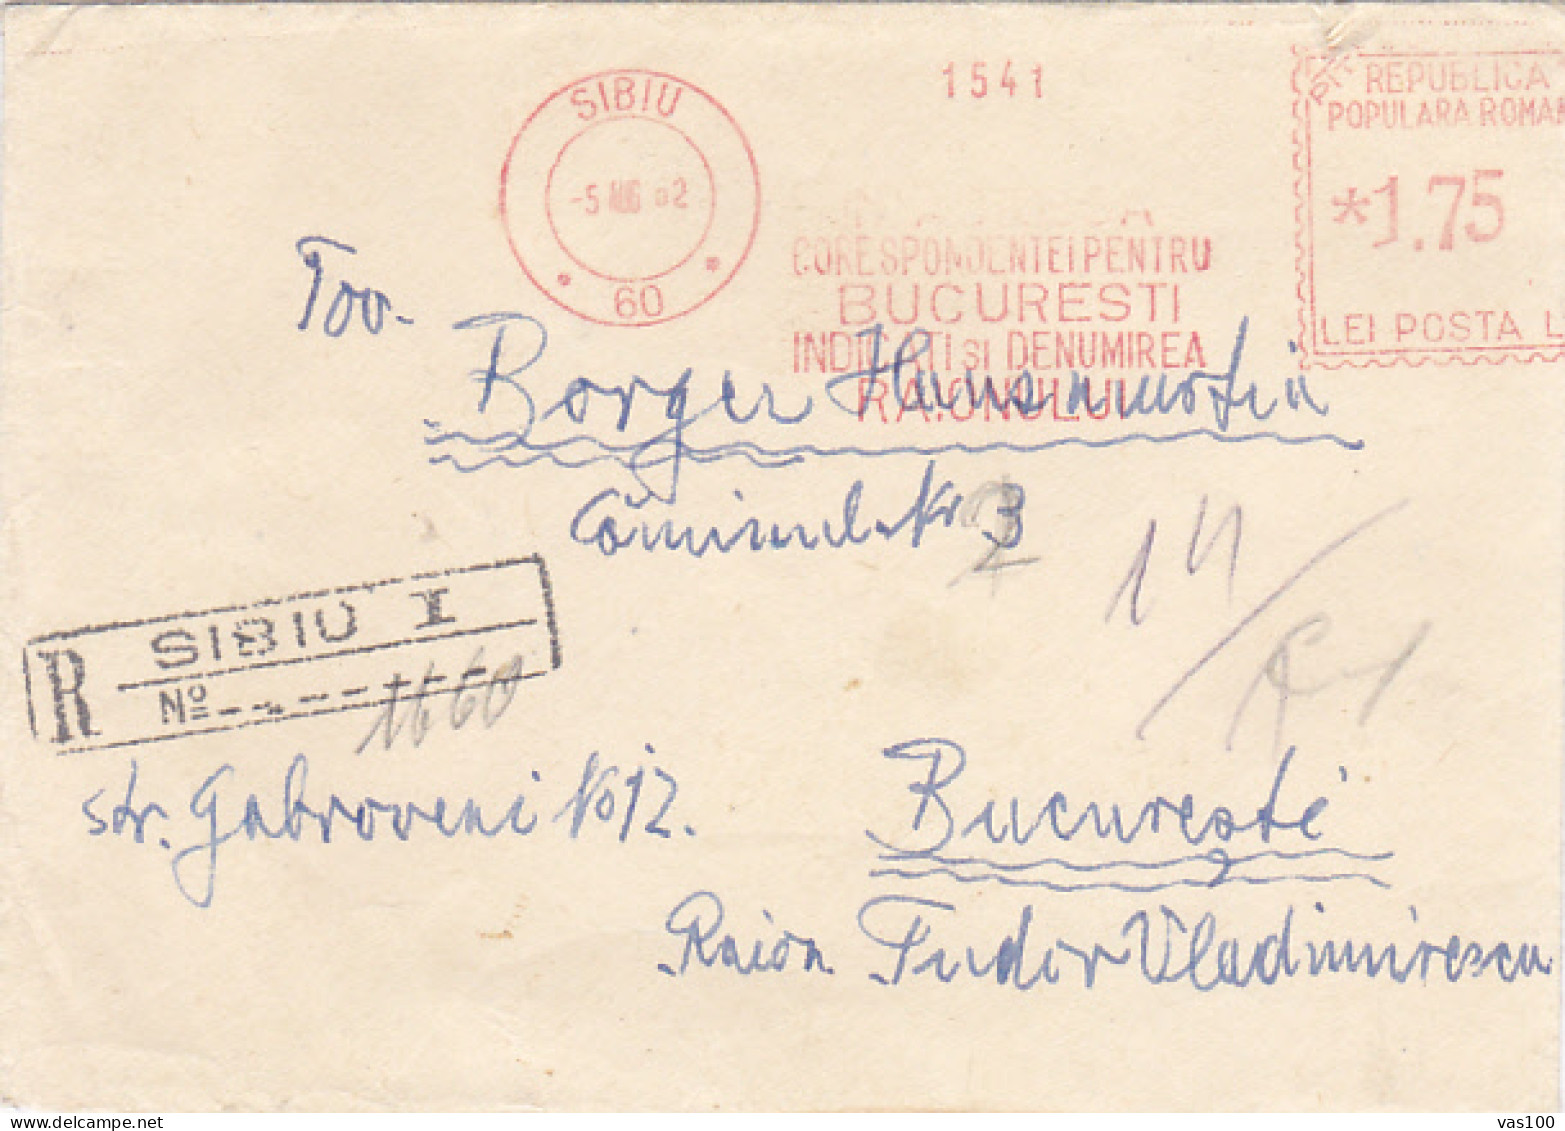 AMOUNT 1.75, SIBIU, RED MACHINE STAMPS ON REGISTERED COVER, 1962, ROMANIA - Covers & Documents